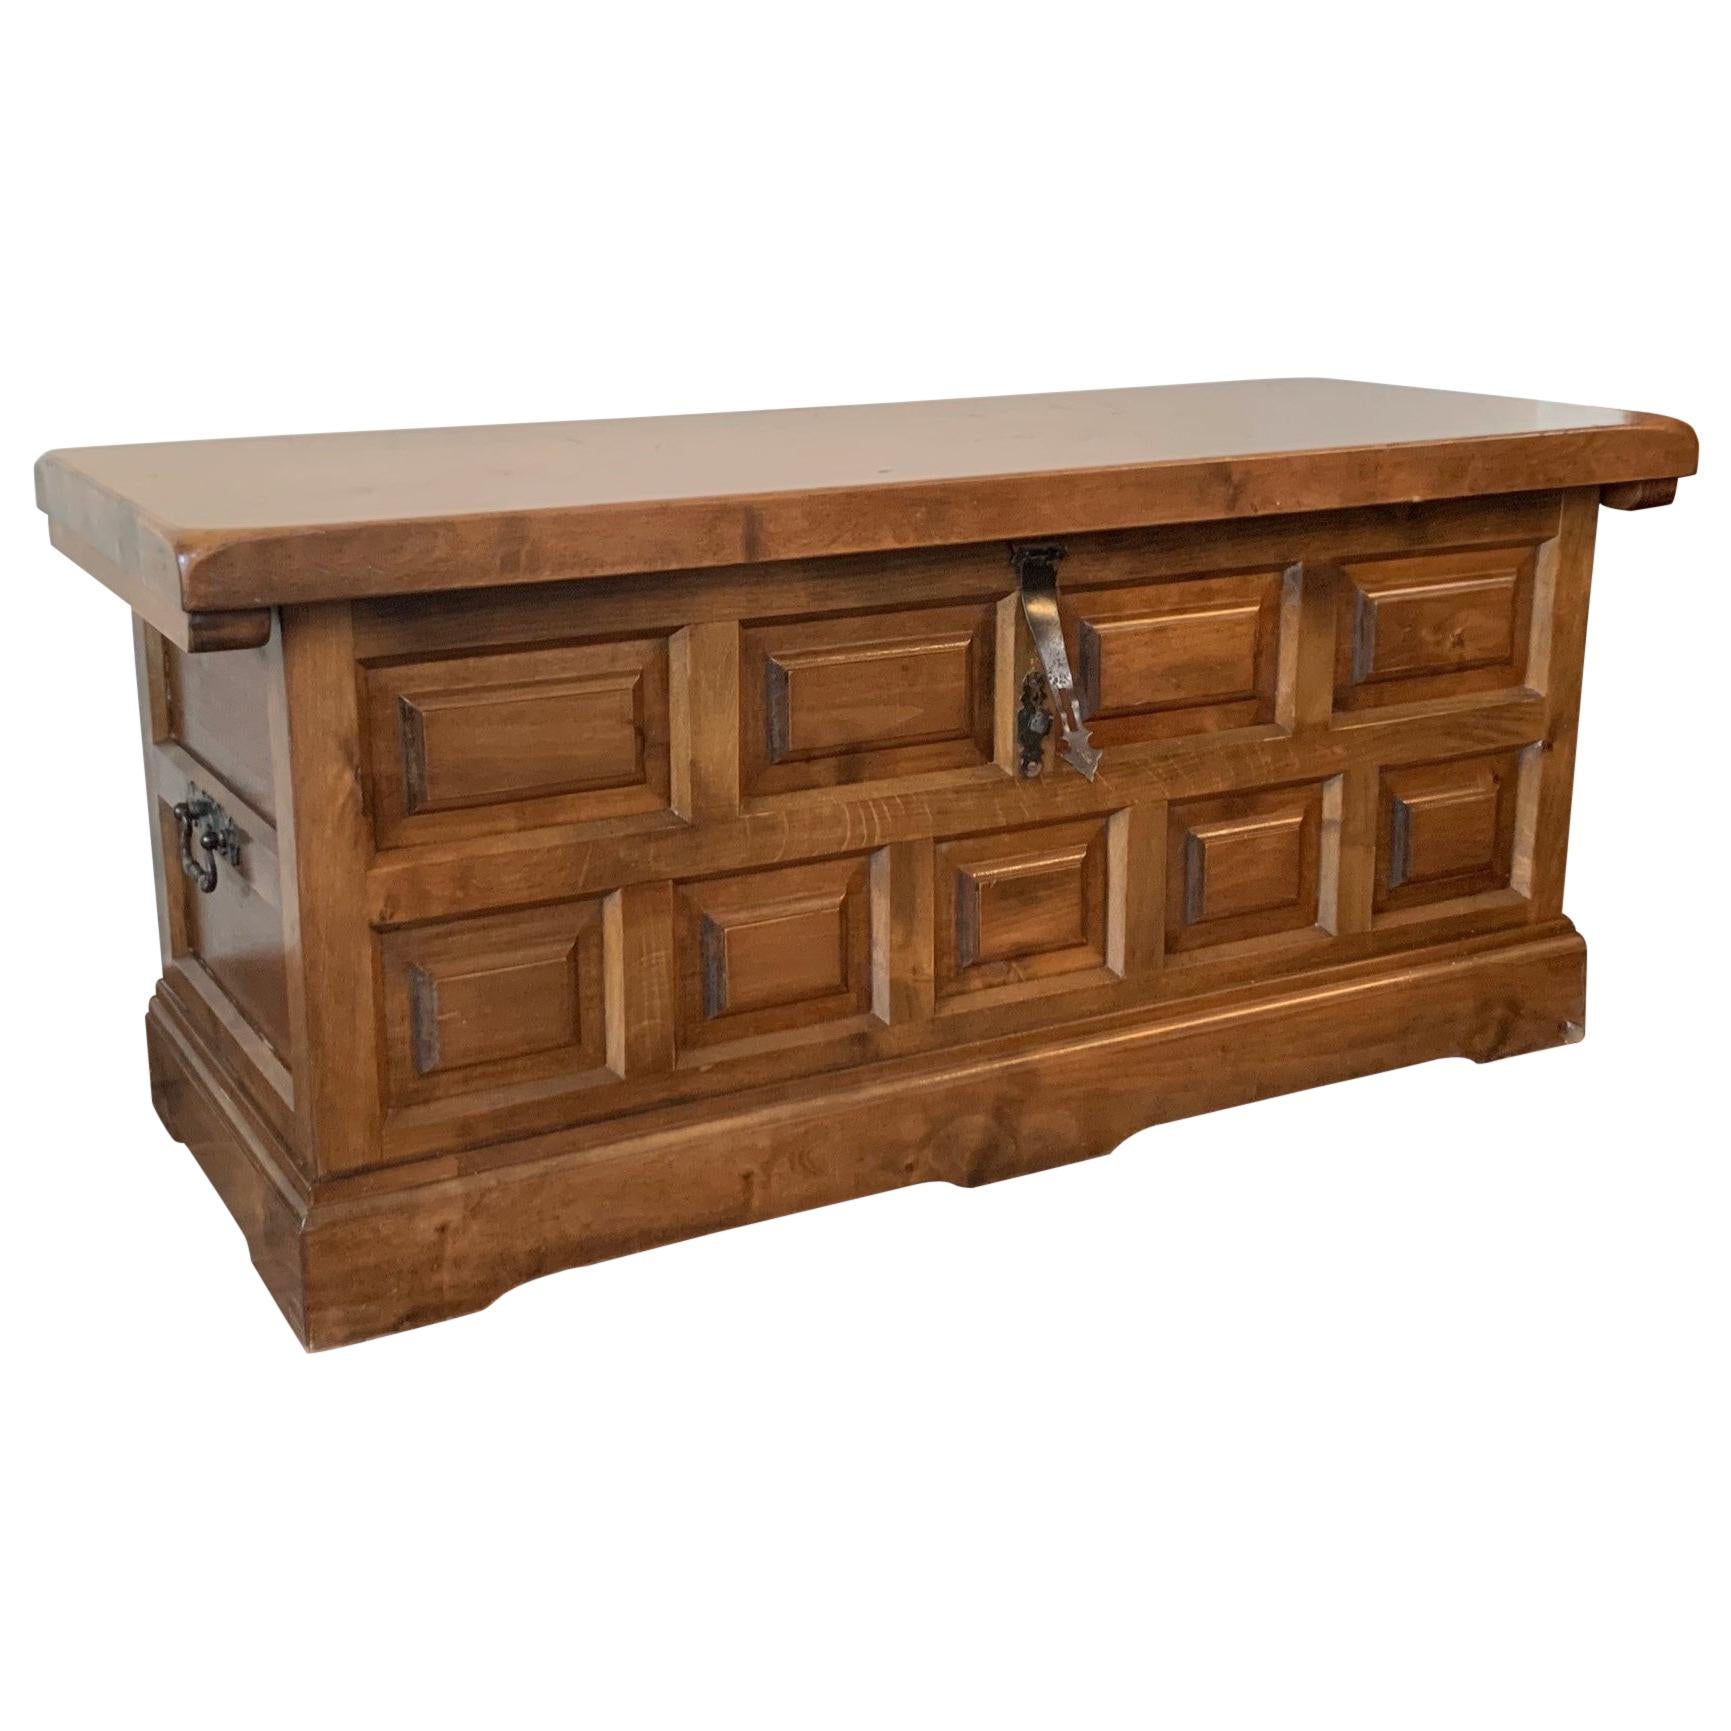 20th Spanish Trunk, Blanket Chest with Raised Wooden Panels and Iron Hardware